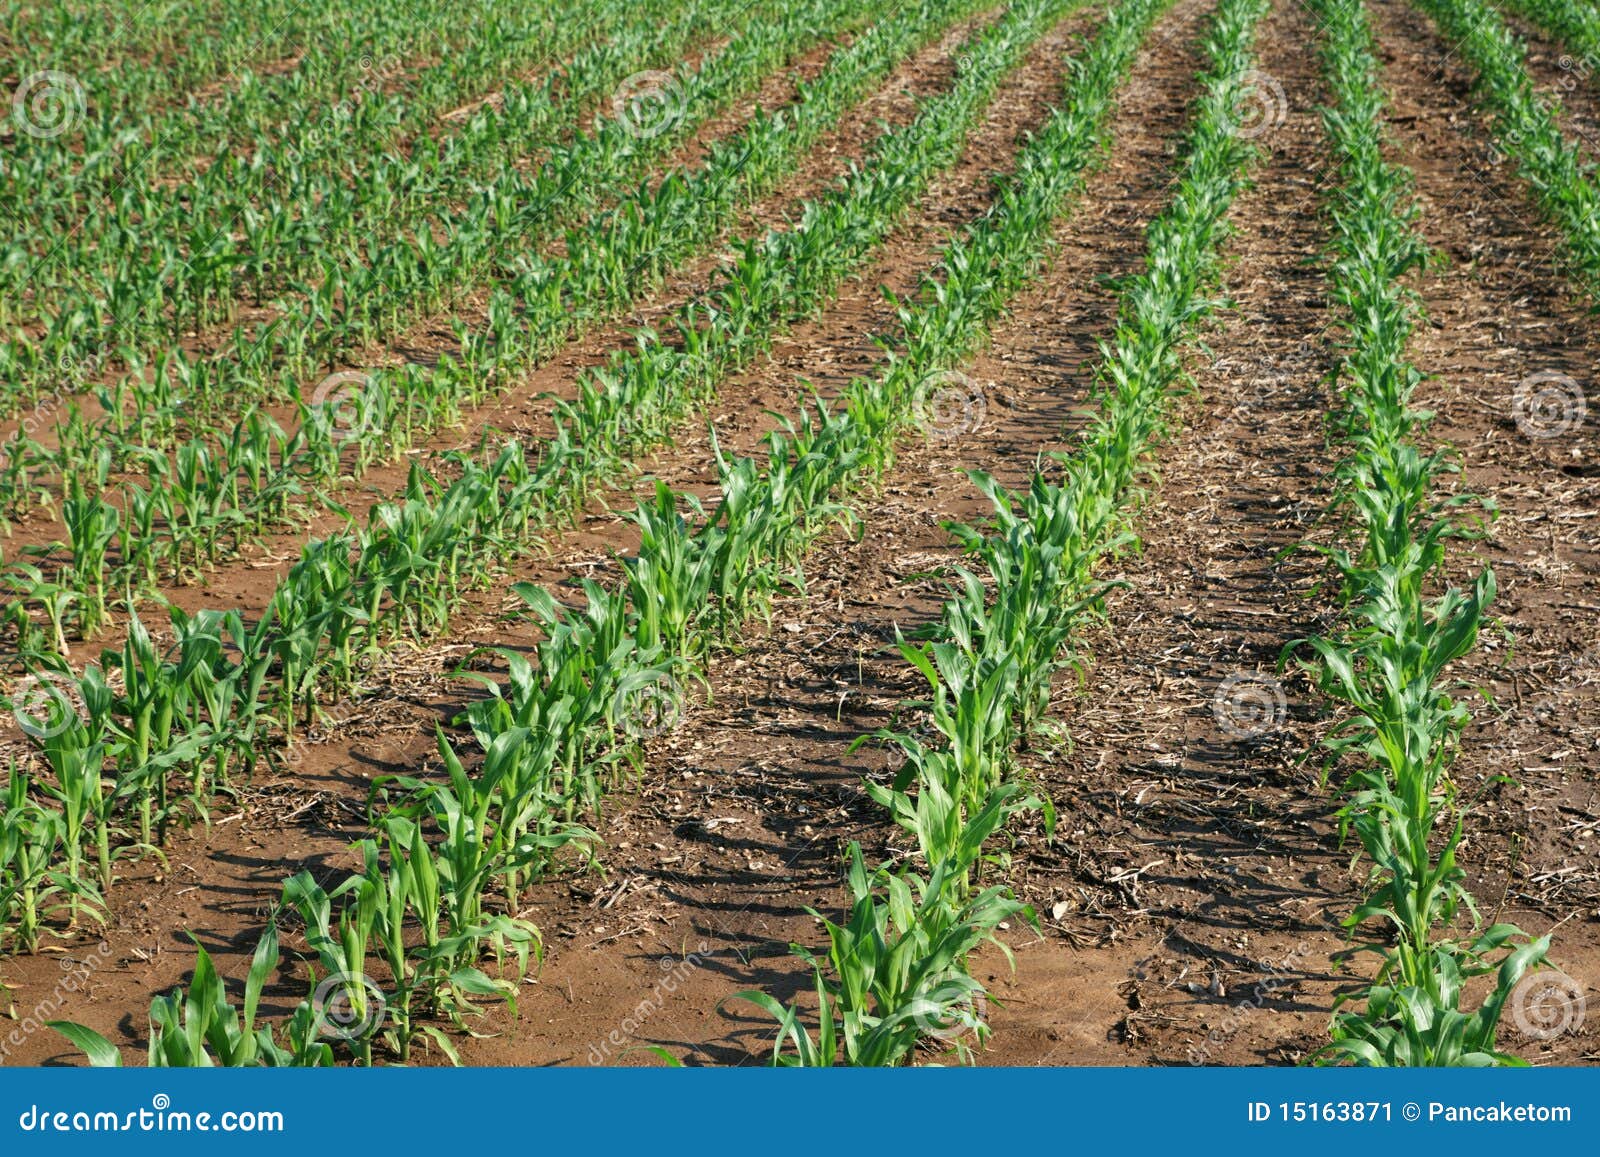 Rows Of Young Corn Plants Stock Image - Image: 15163871